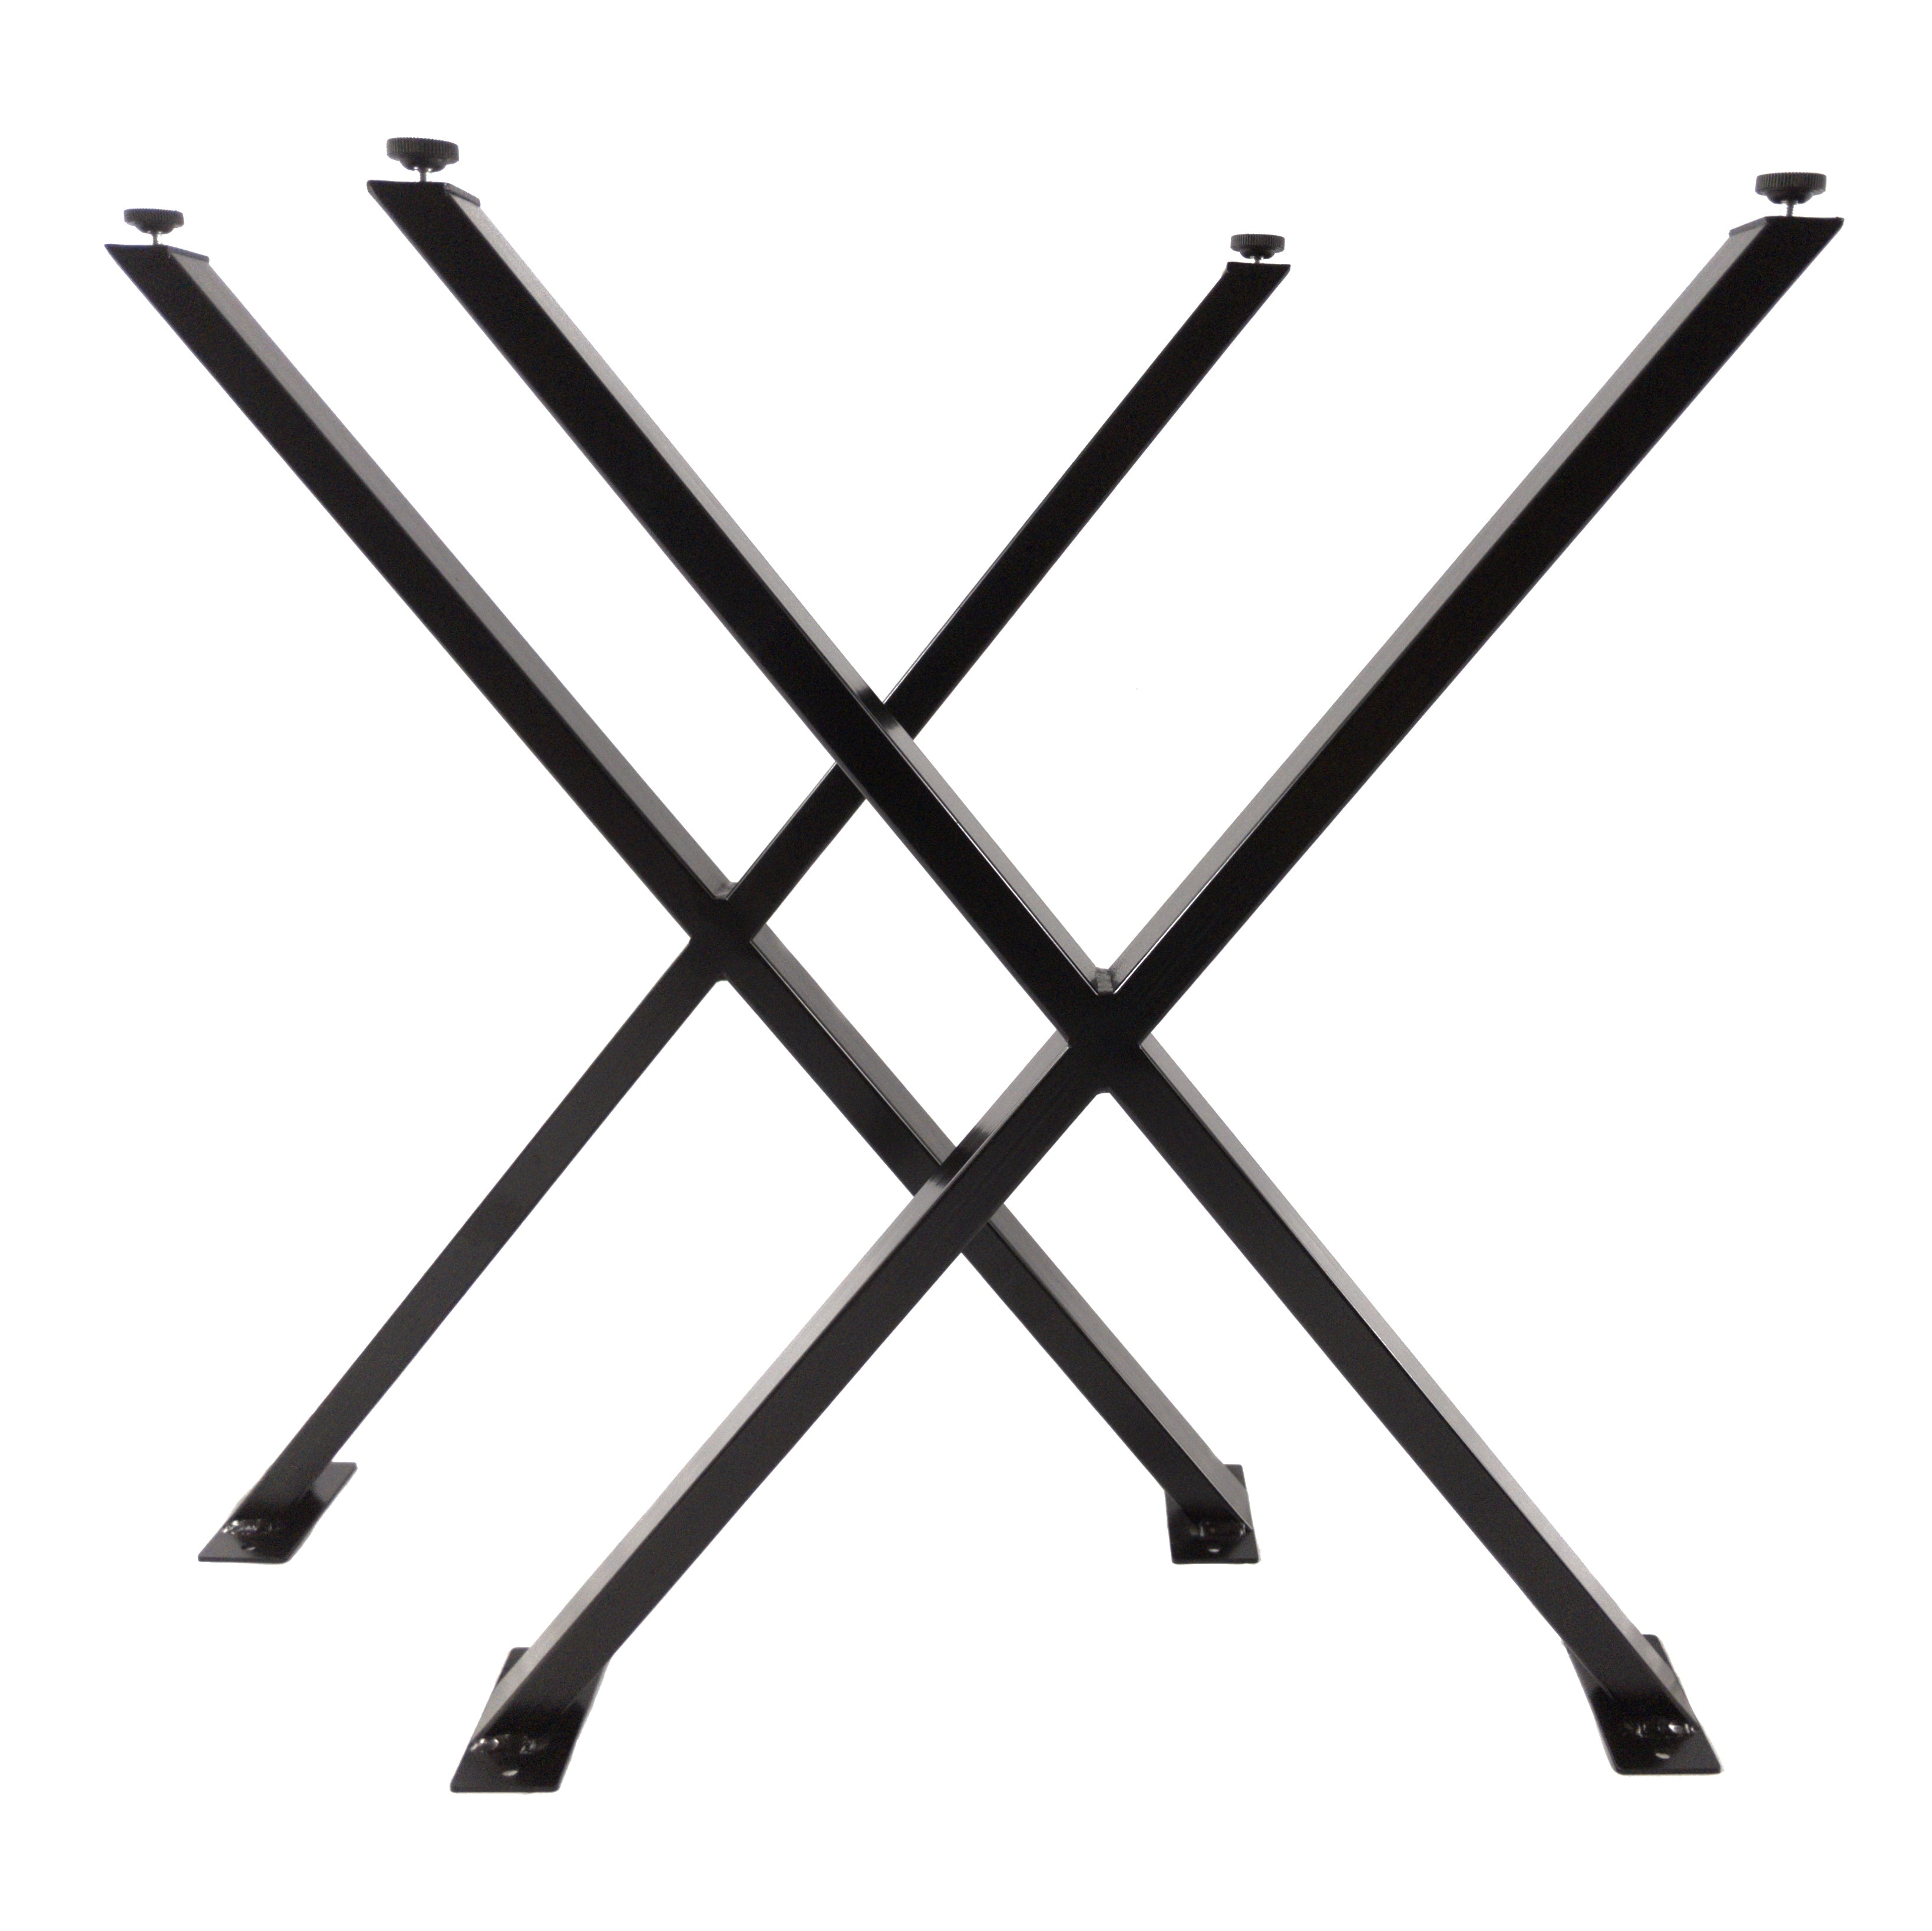 SET of 2 Modern Industrial X Table Legs, Self Leveling, Heavy Duty Kitchen, Dining, and Bench Legs, Powder Coated Black